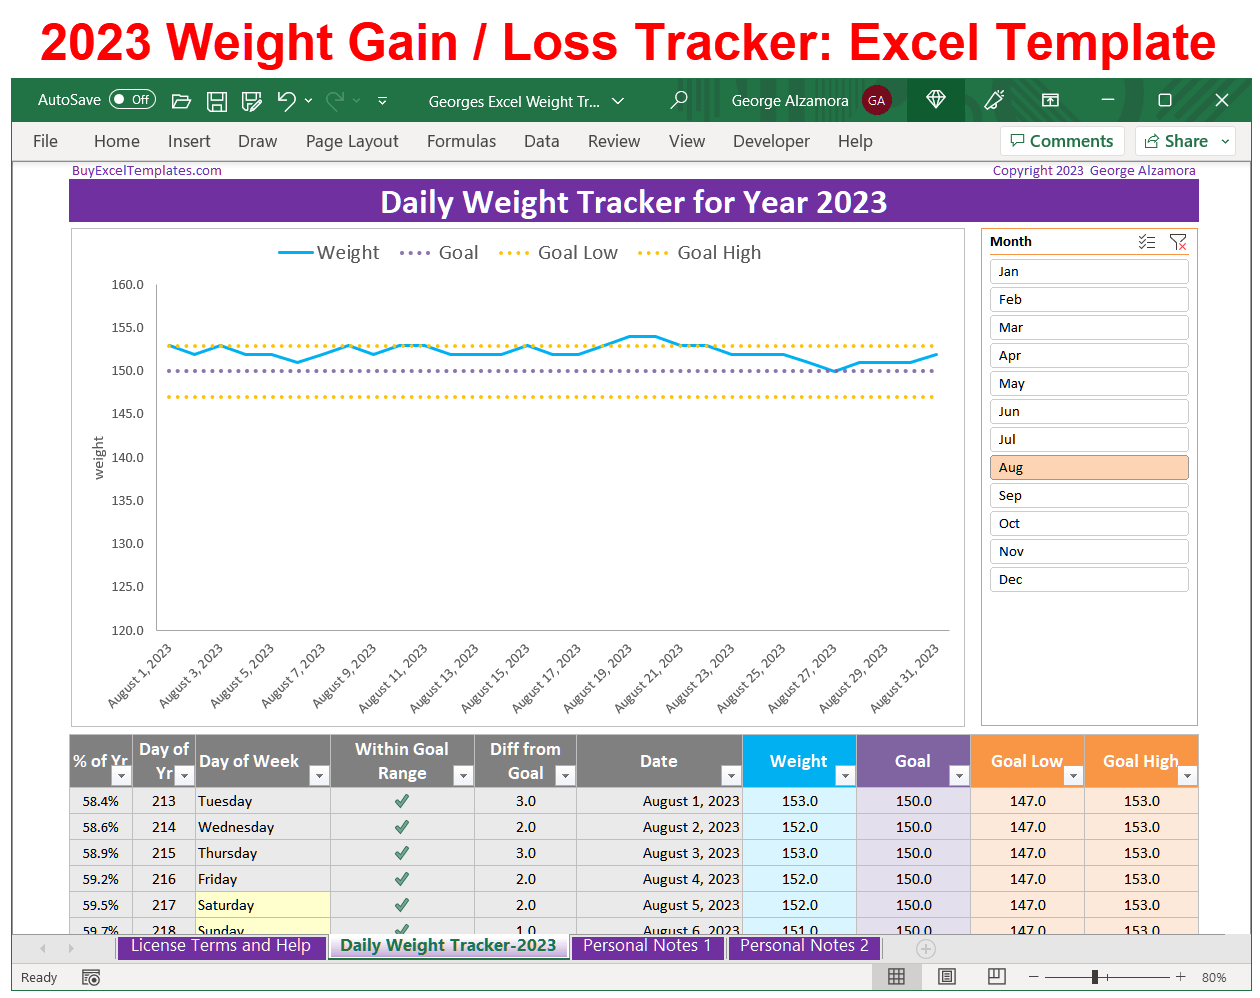 2023 Weight Gain Tracker Excel Template